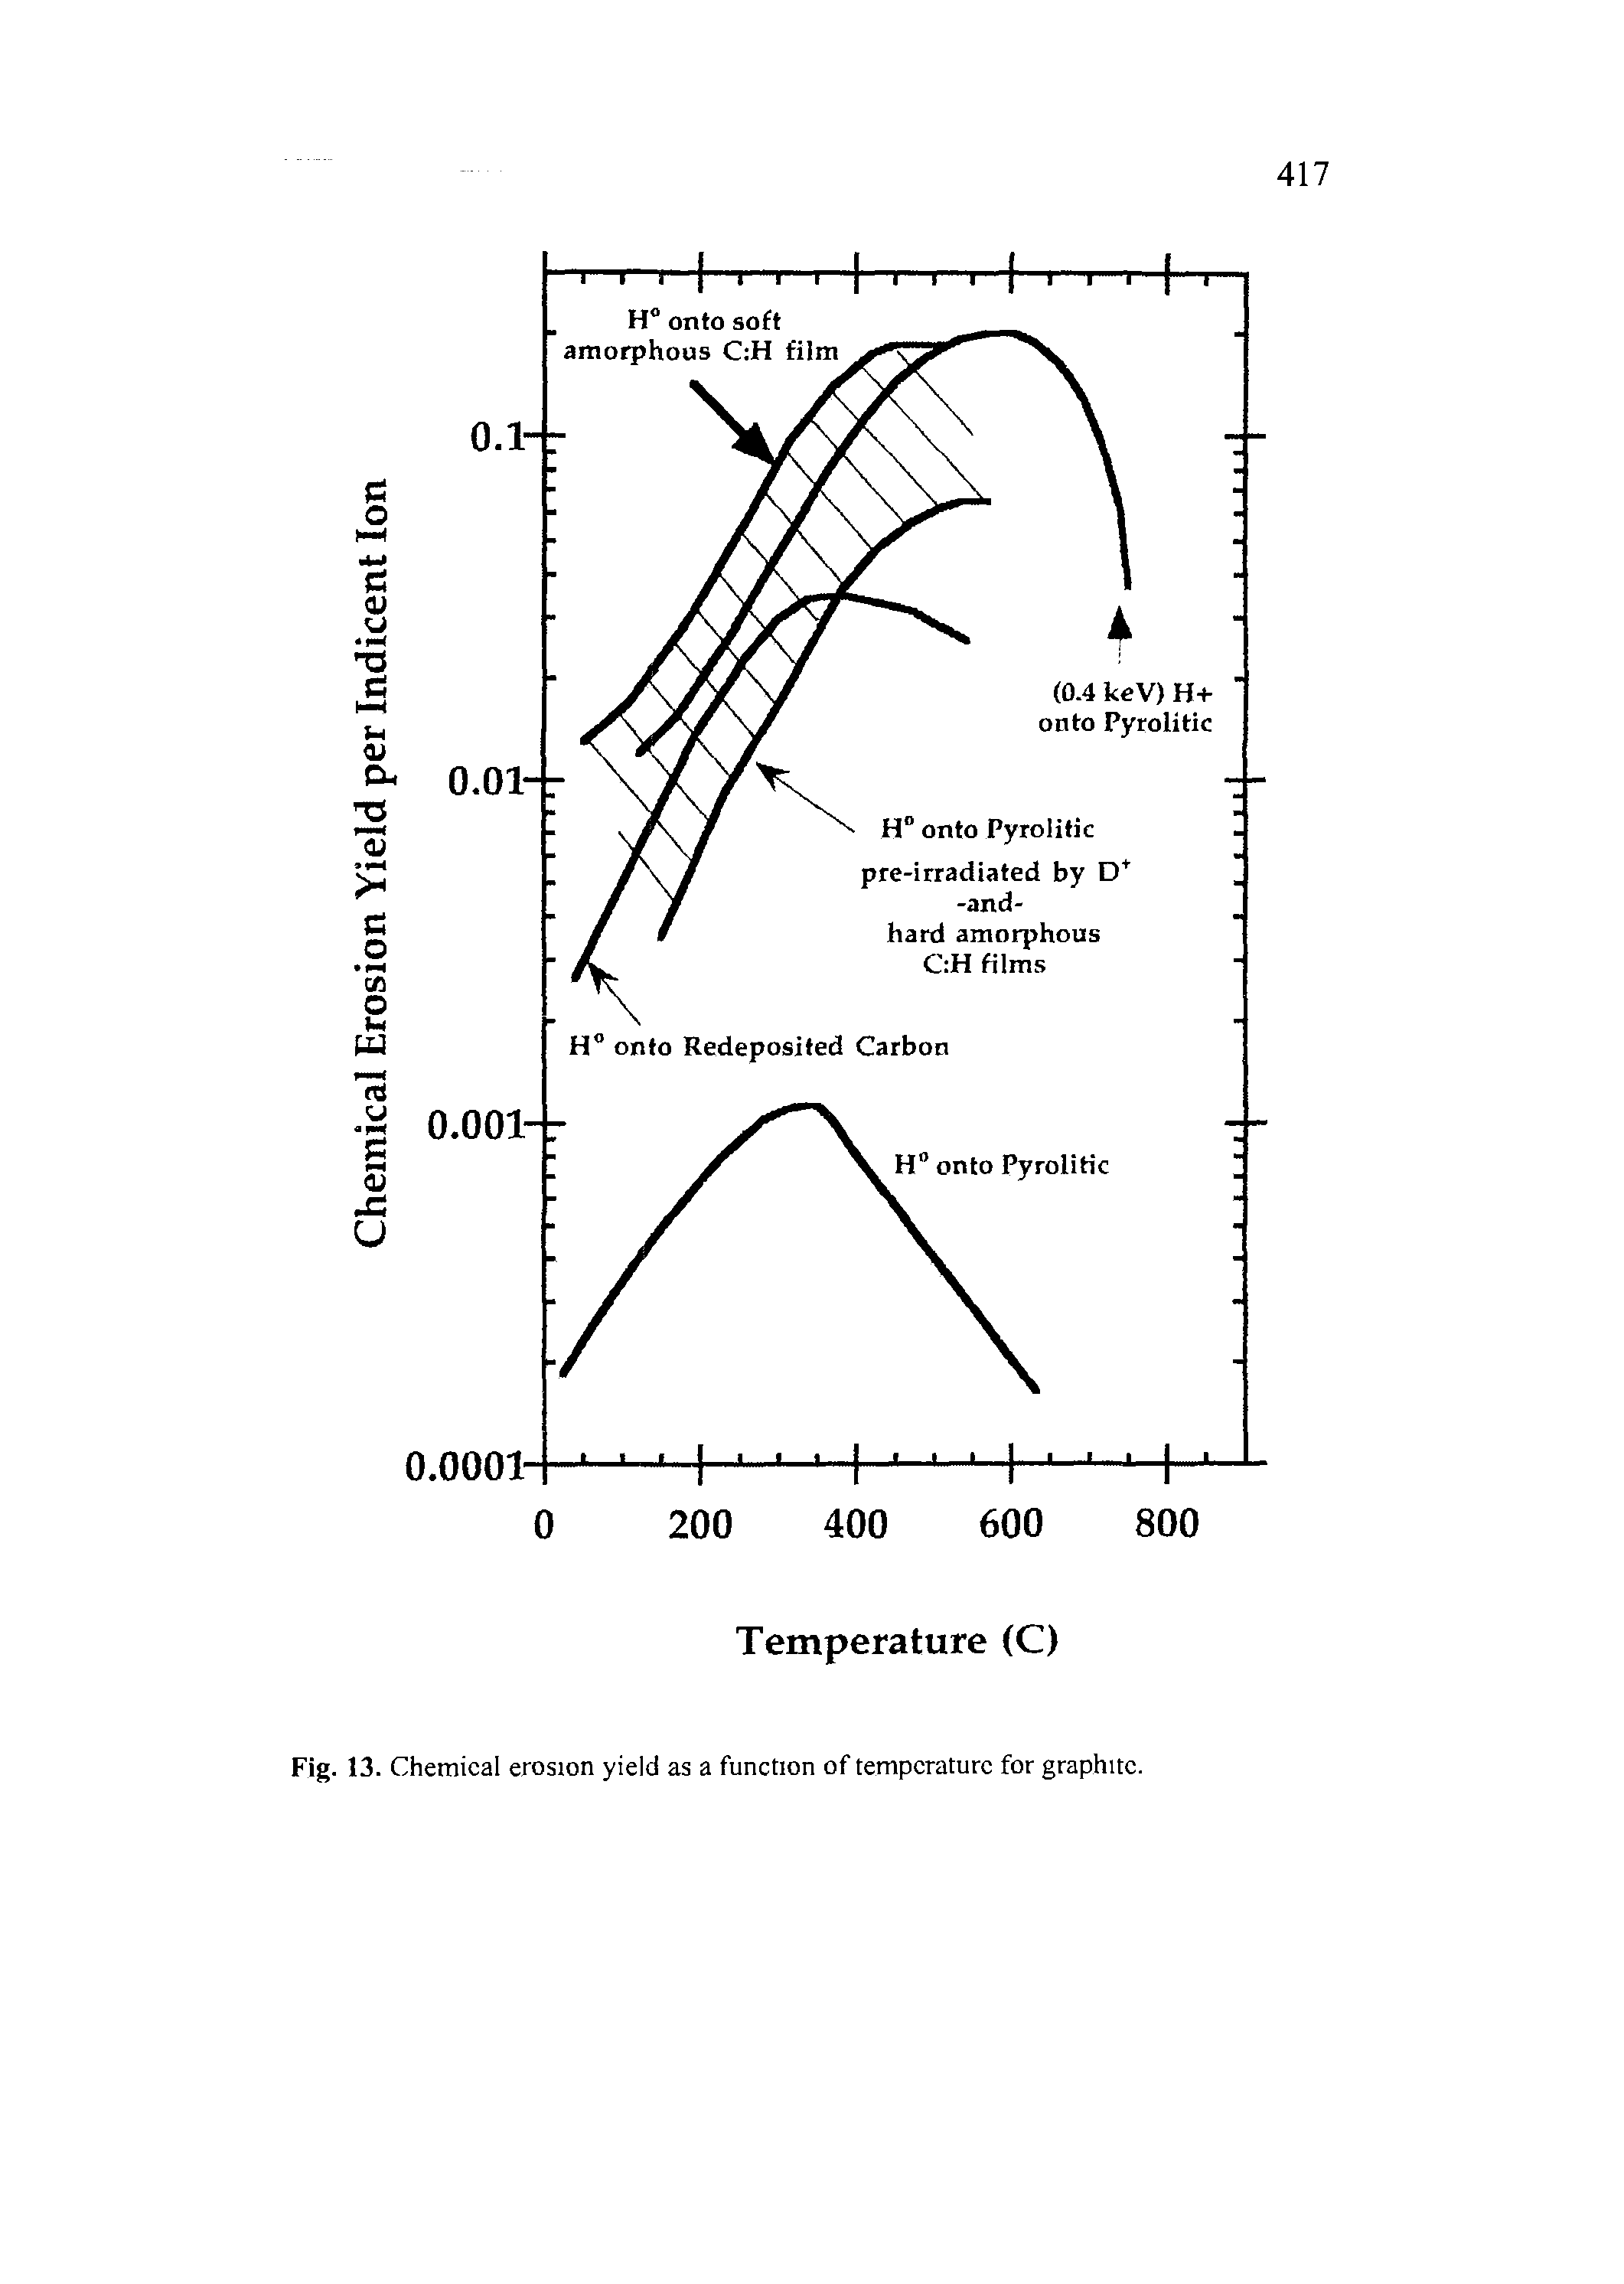 Fig. 13. Chemical erosion yield as a function of temperature for graphite.